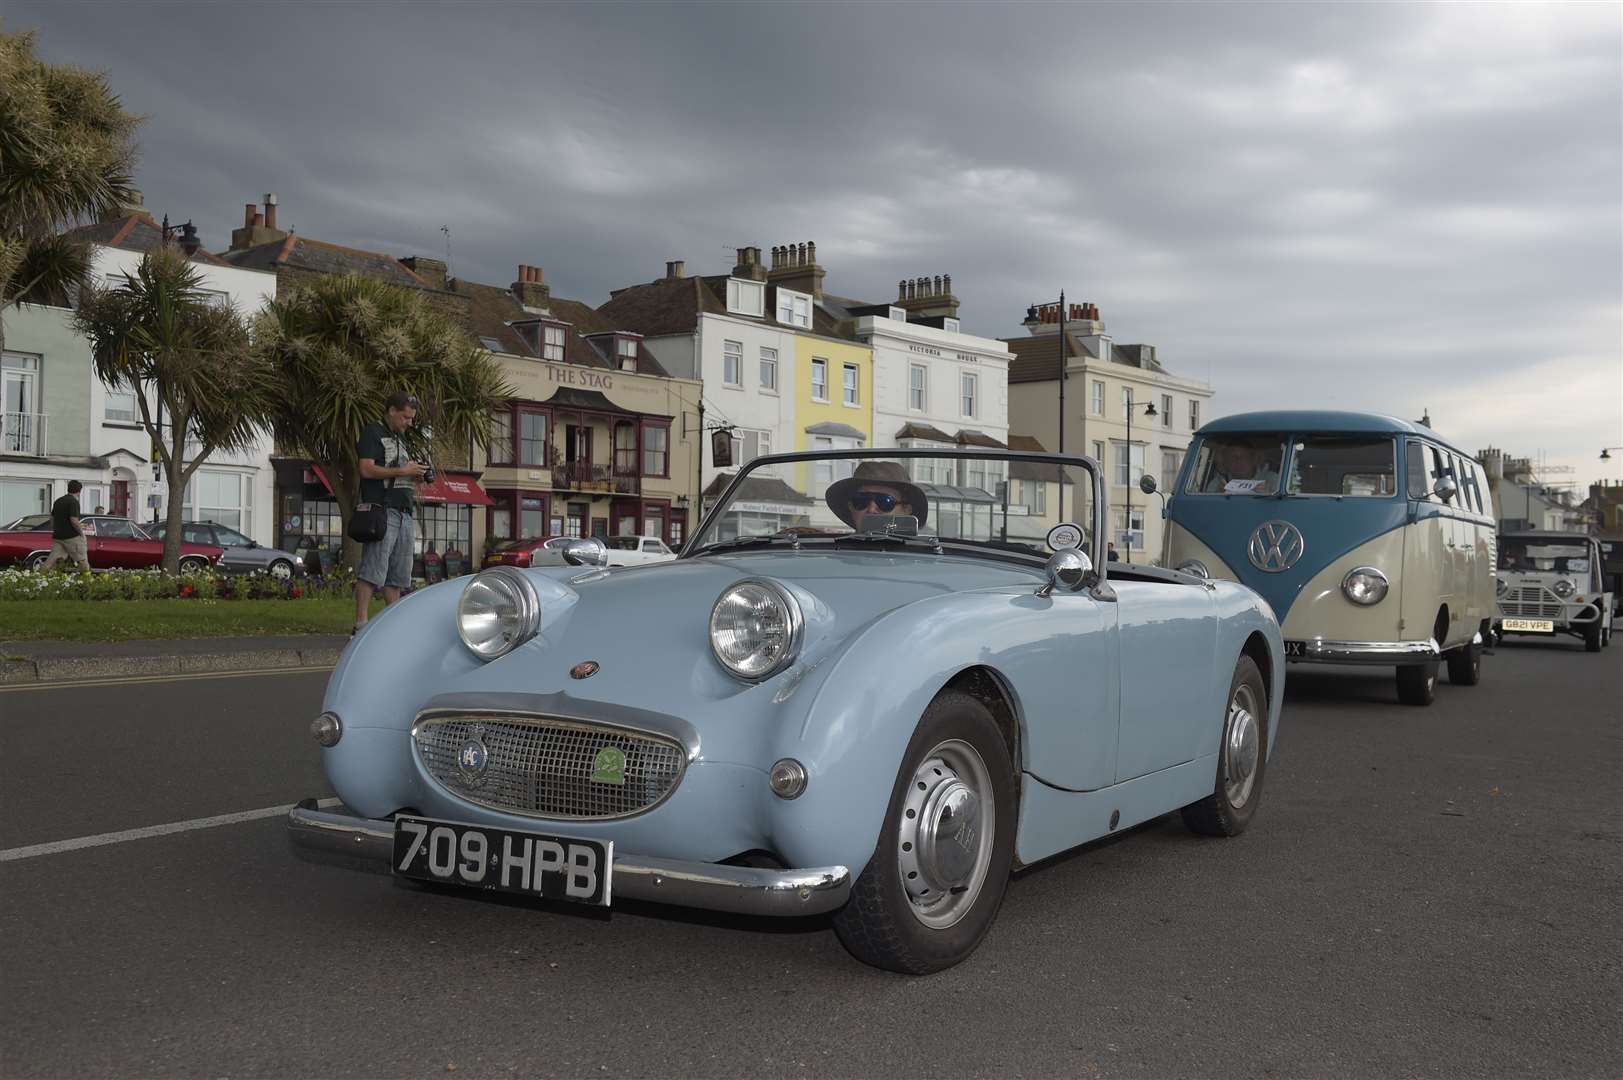 Classics rolled up to Walmer Green